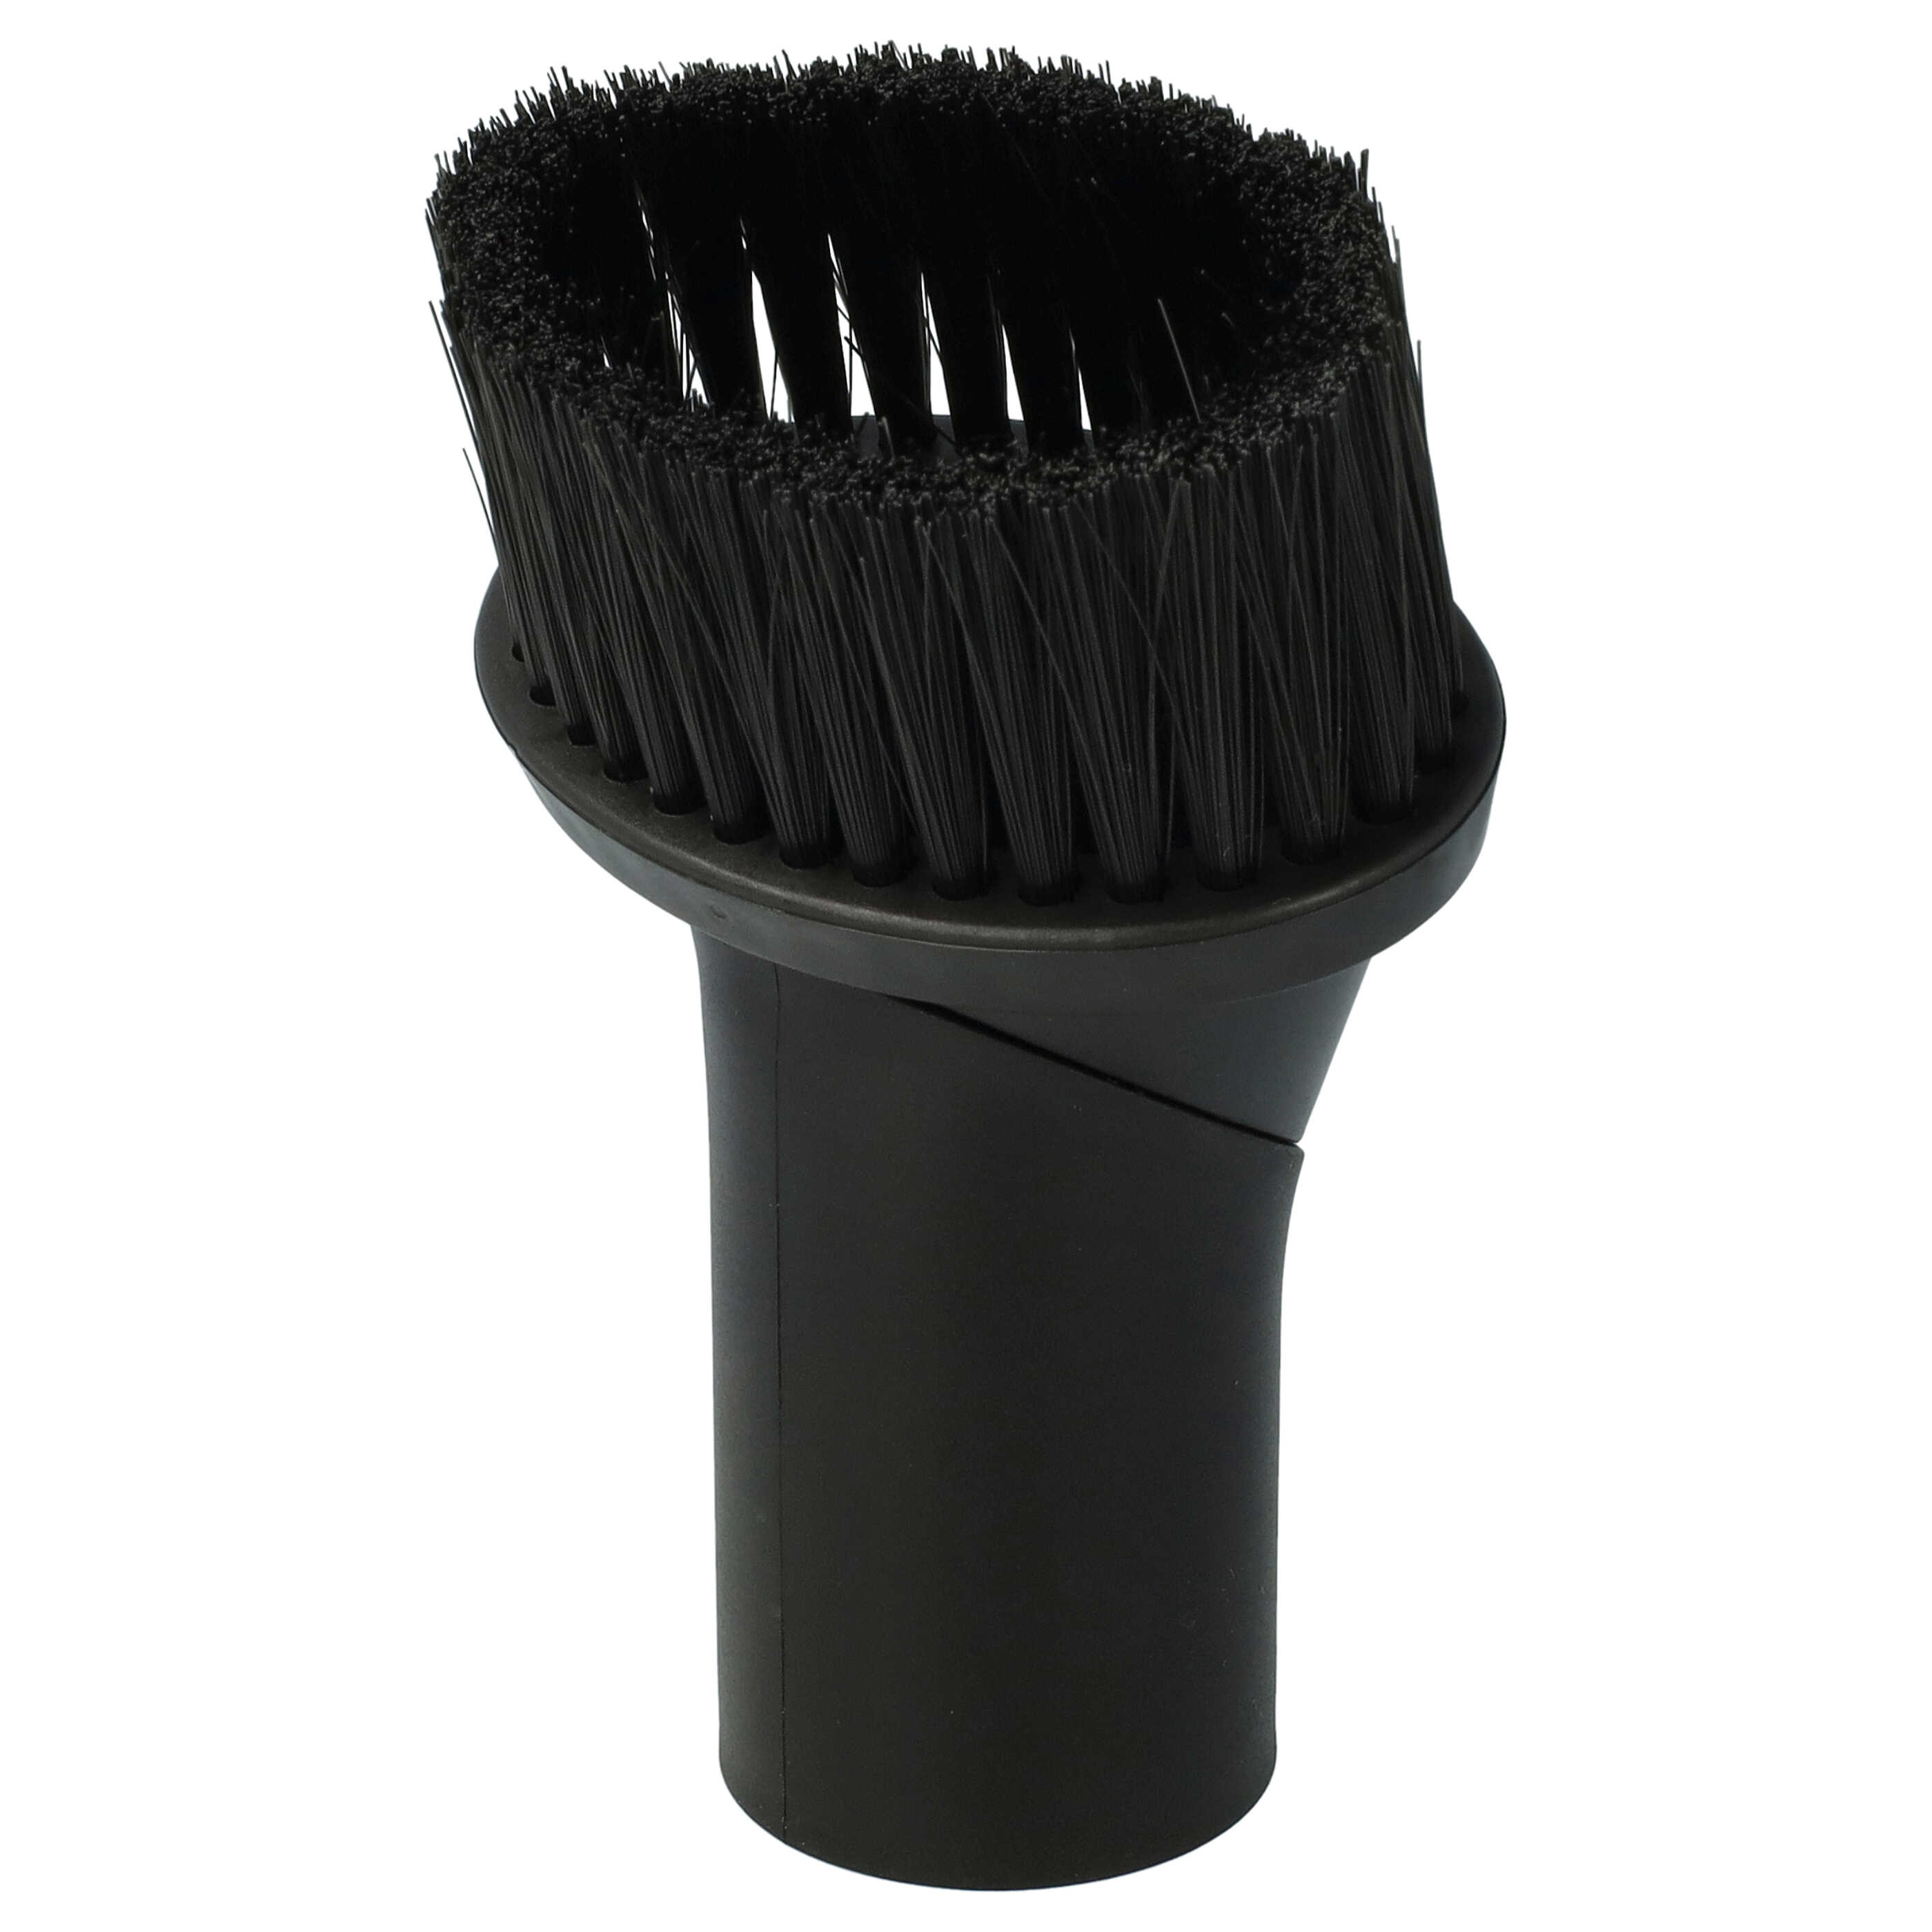  Brush Nozzle 35 mm Connector for Vacuum Cleaner - Furniture Brush with Bristles